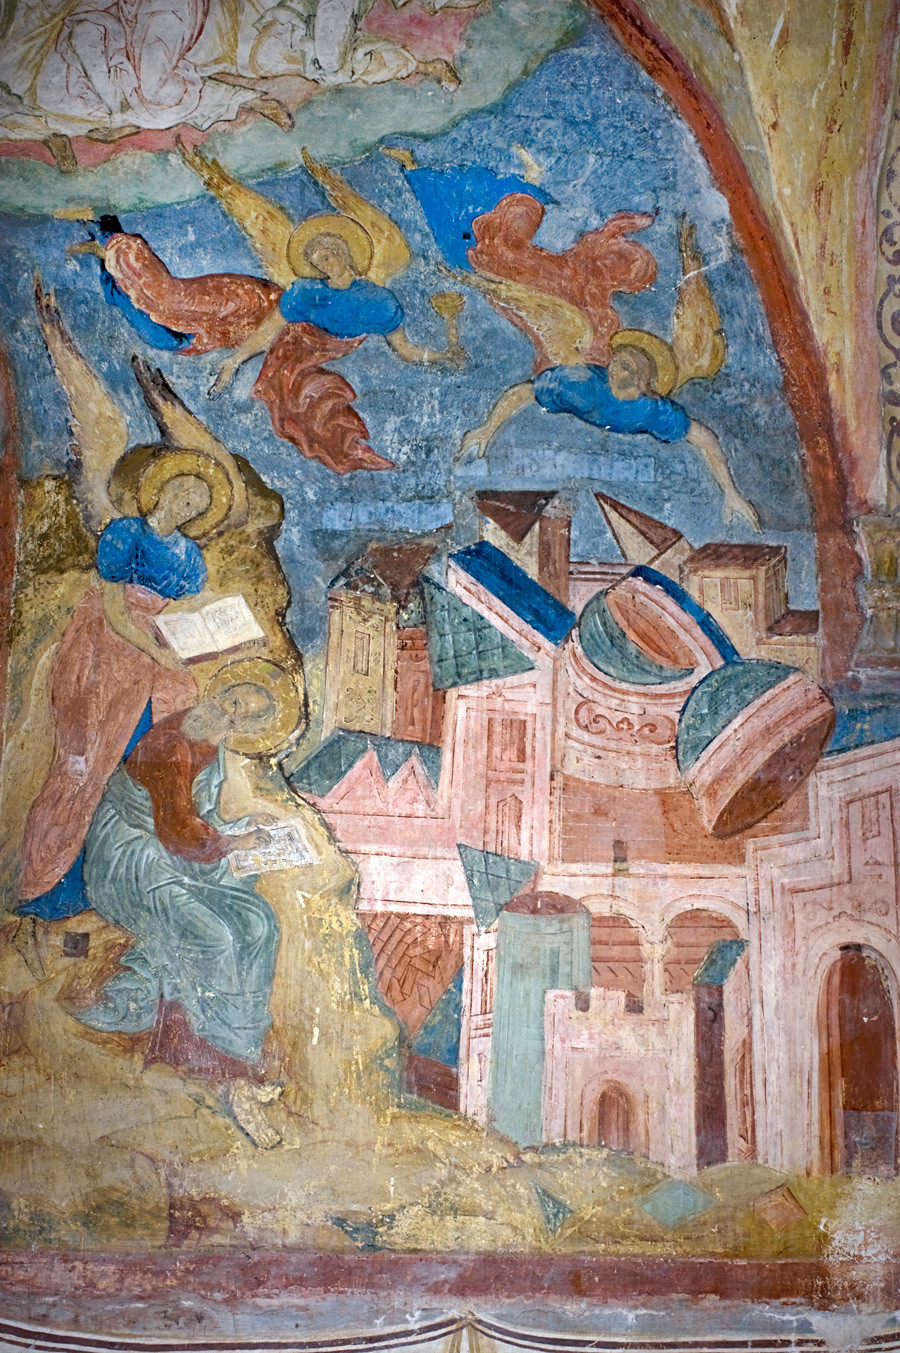 St. Kirill Belozersk Monastery. Dormition Cathedral, north gallery. East wall with Apocalypse fresco: Destruction of Babylon & St John with angel writing Book of Revelation. June 2, 2014.